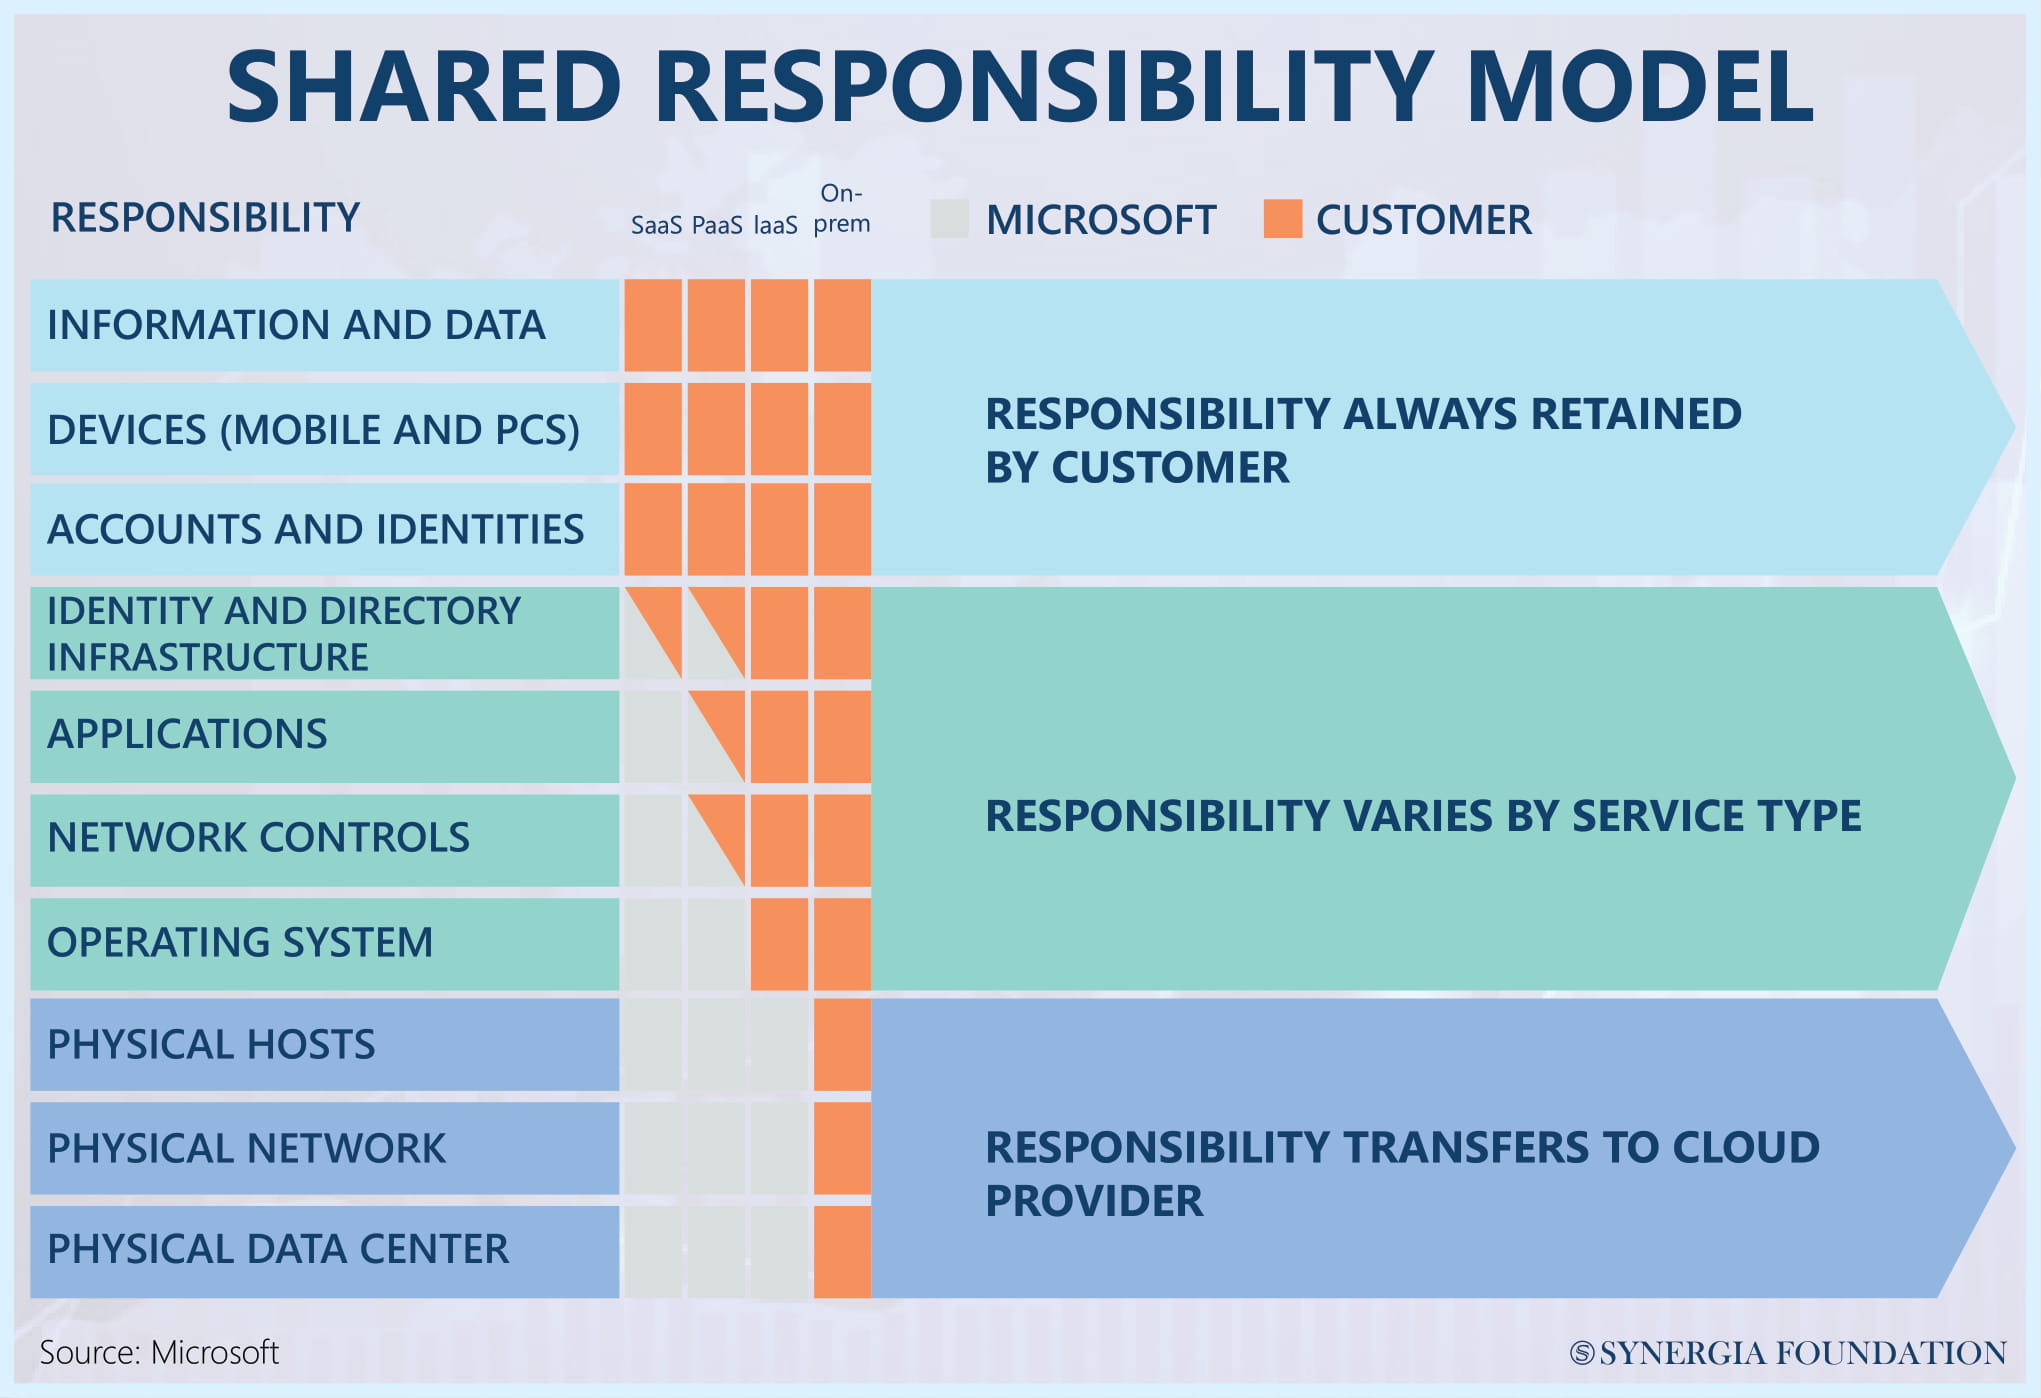 Shared responsibility